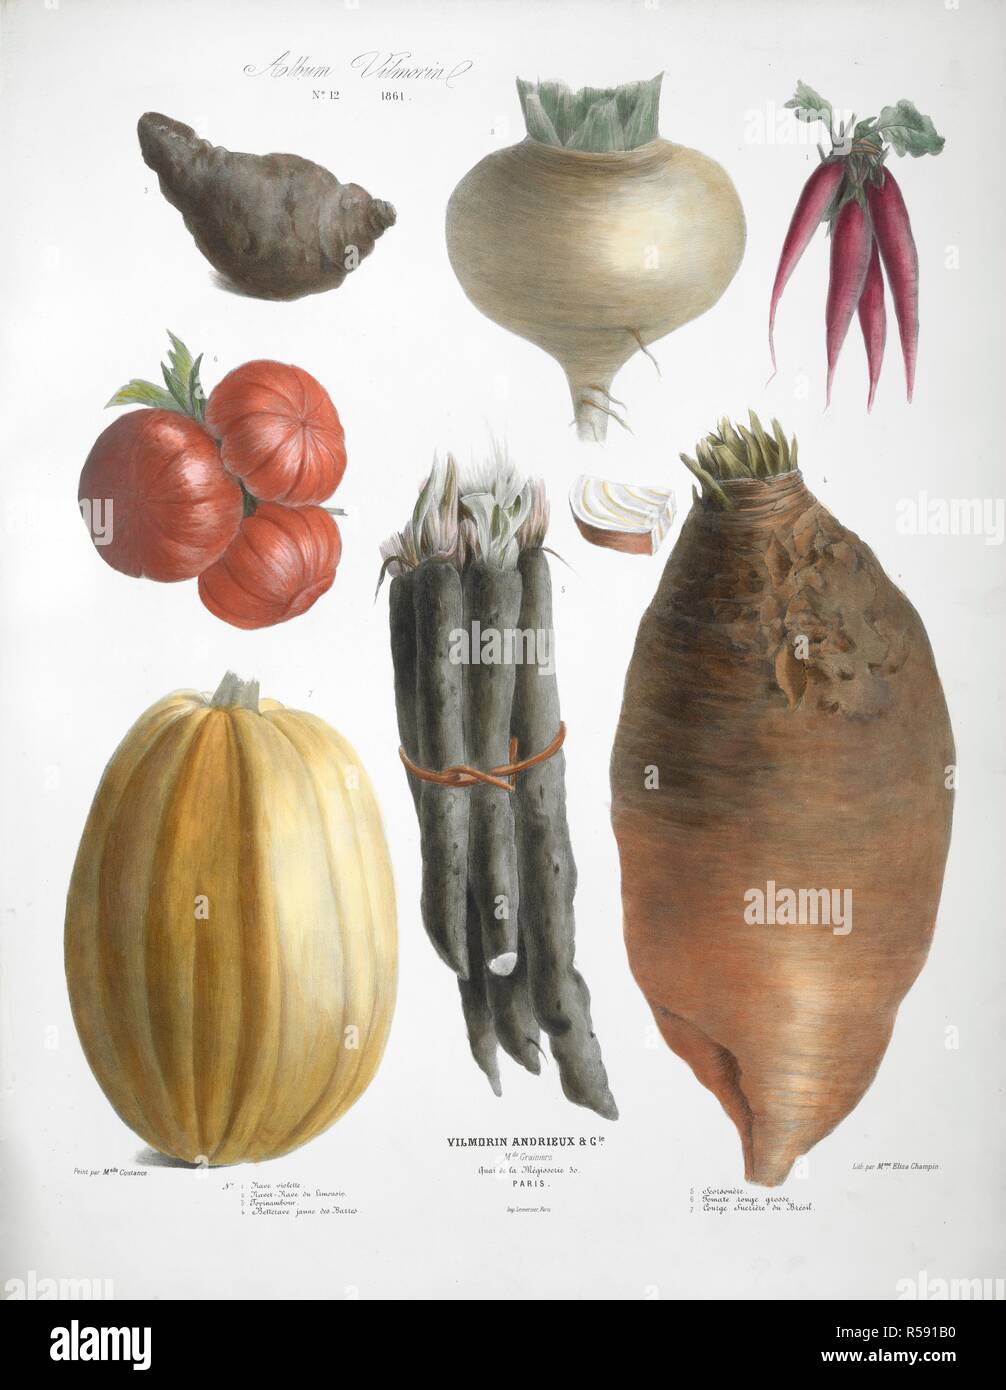 Various Vegetables, including turnips, tomatoes, radish and squash. Album Vilmorin. [68 Coloured plates of vegetables and flowers, printed by E. Champin and Mlle. Coutance.]. Paris, [1850]. Source: N.Tab.2004/k. plate 12. Author: de Vilmorin, Pierre LÃ©vÃªque. Stock Photo